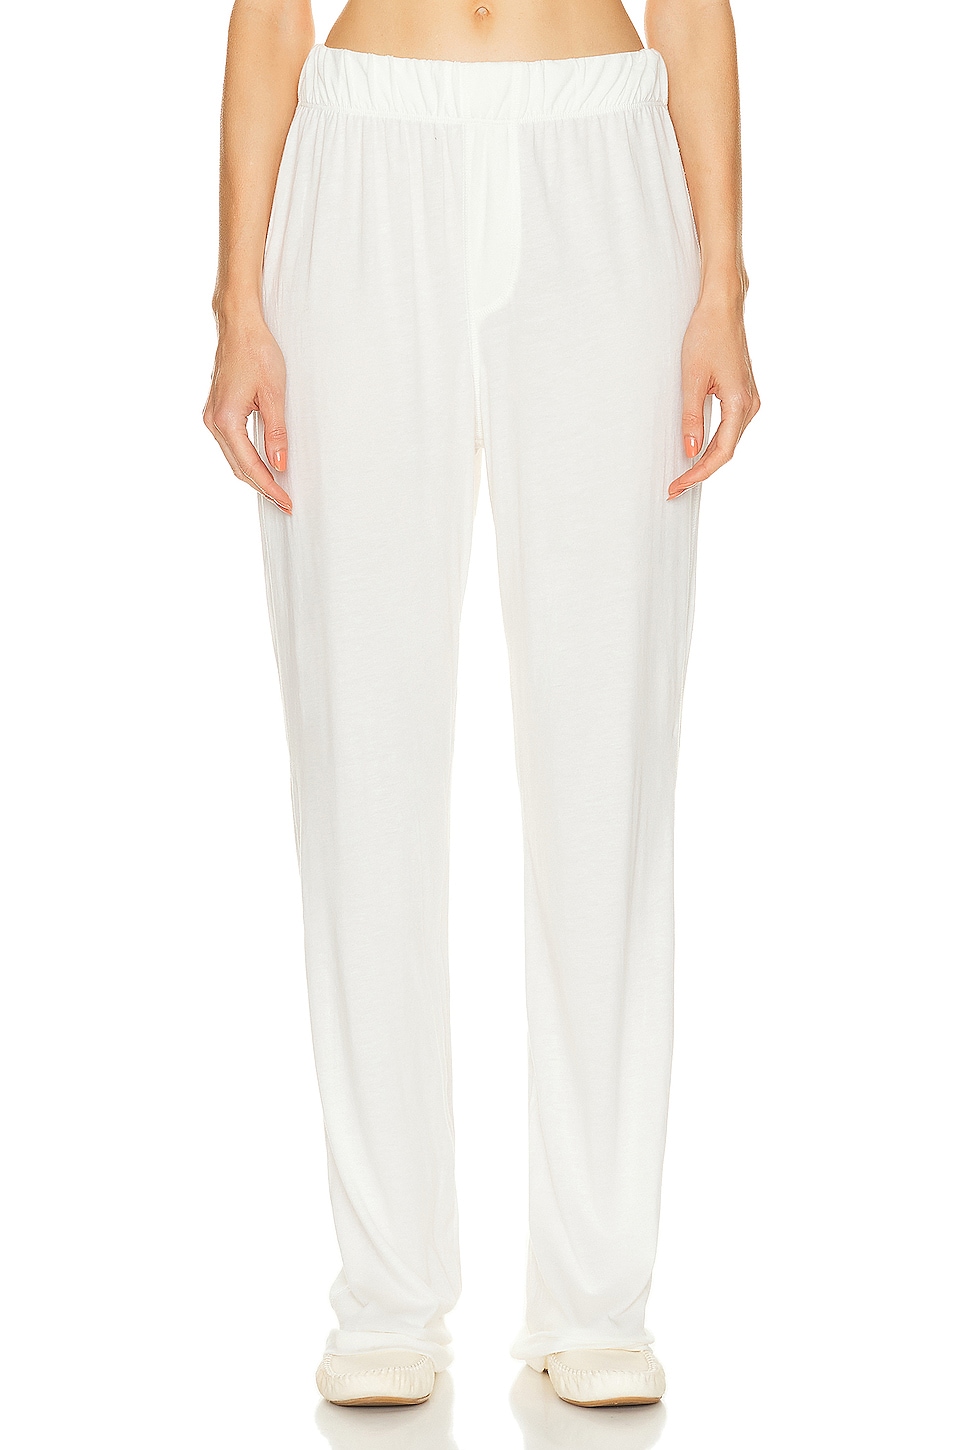 Image 1 of Eterne Lounge Pant in Ivory